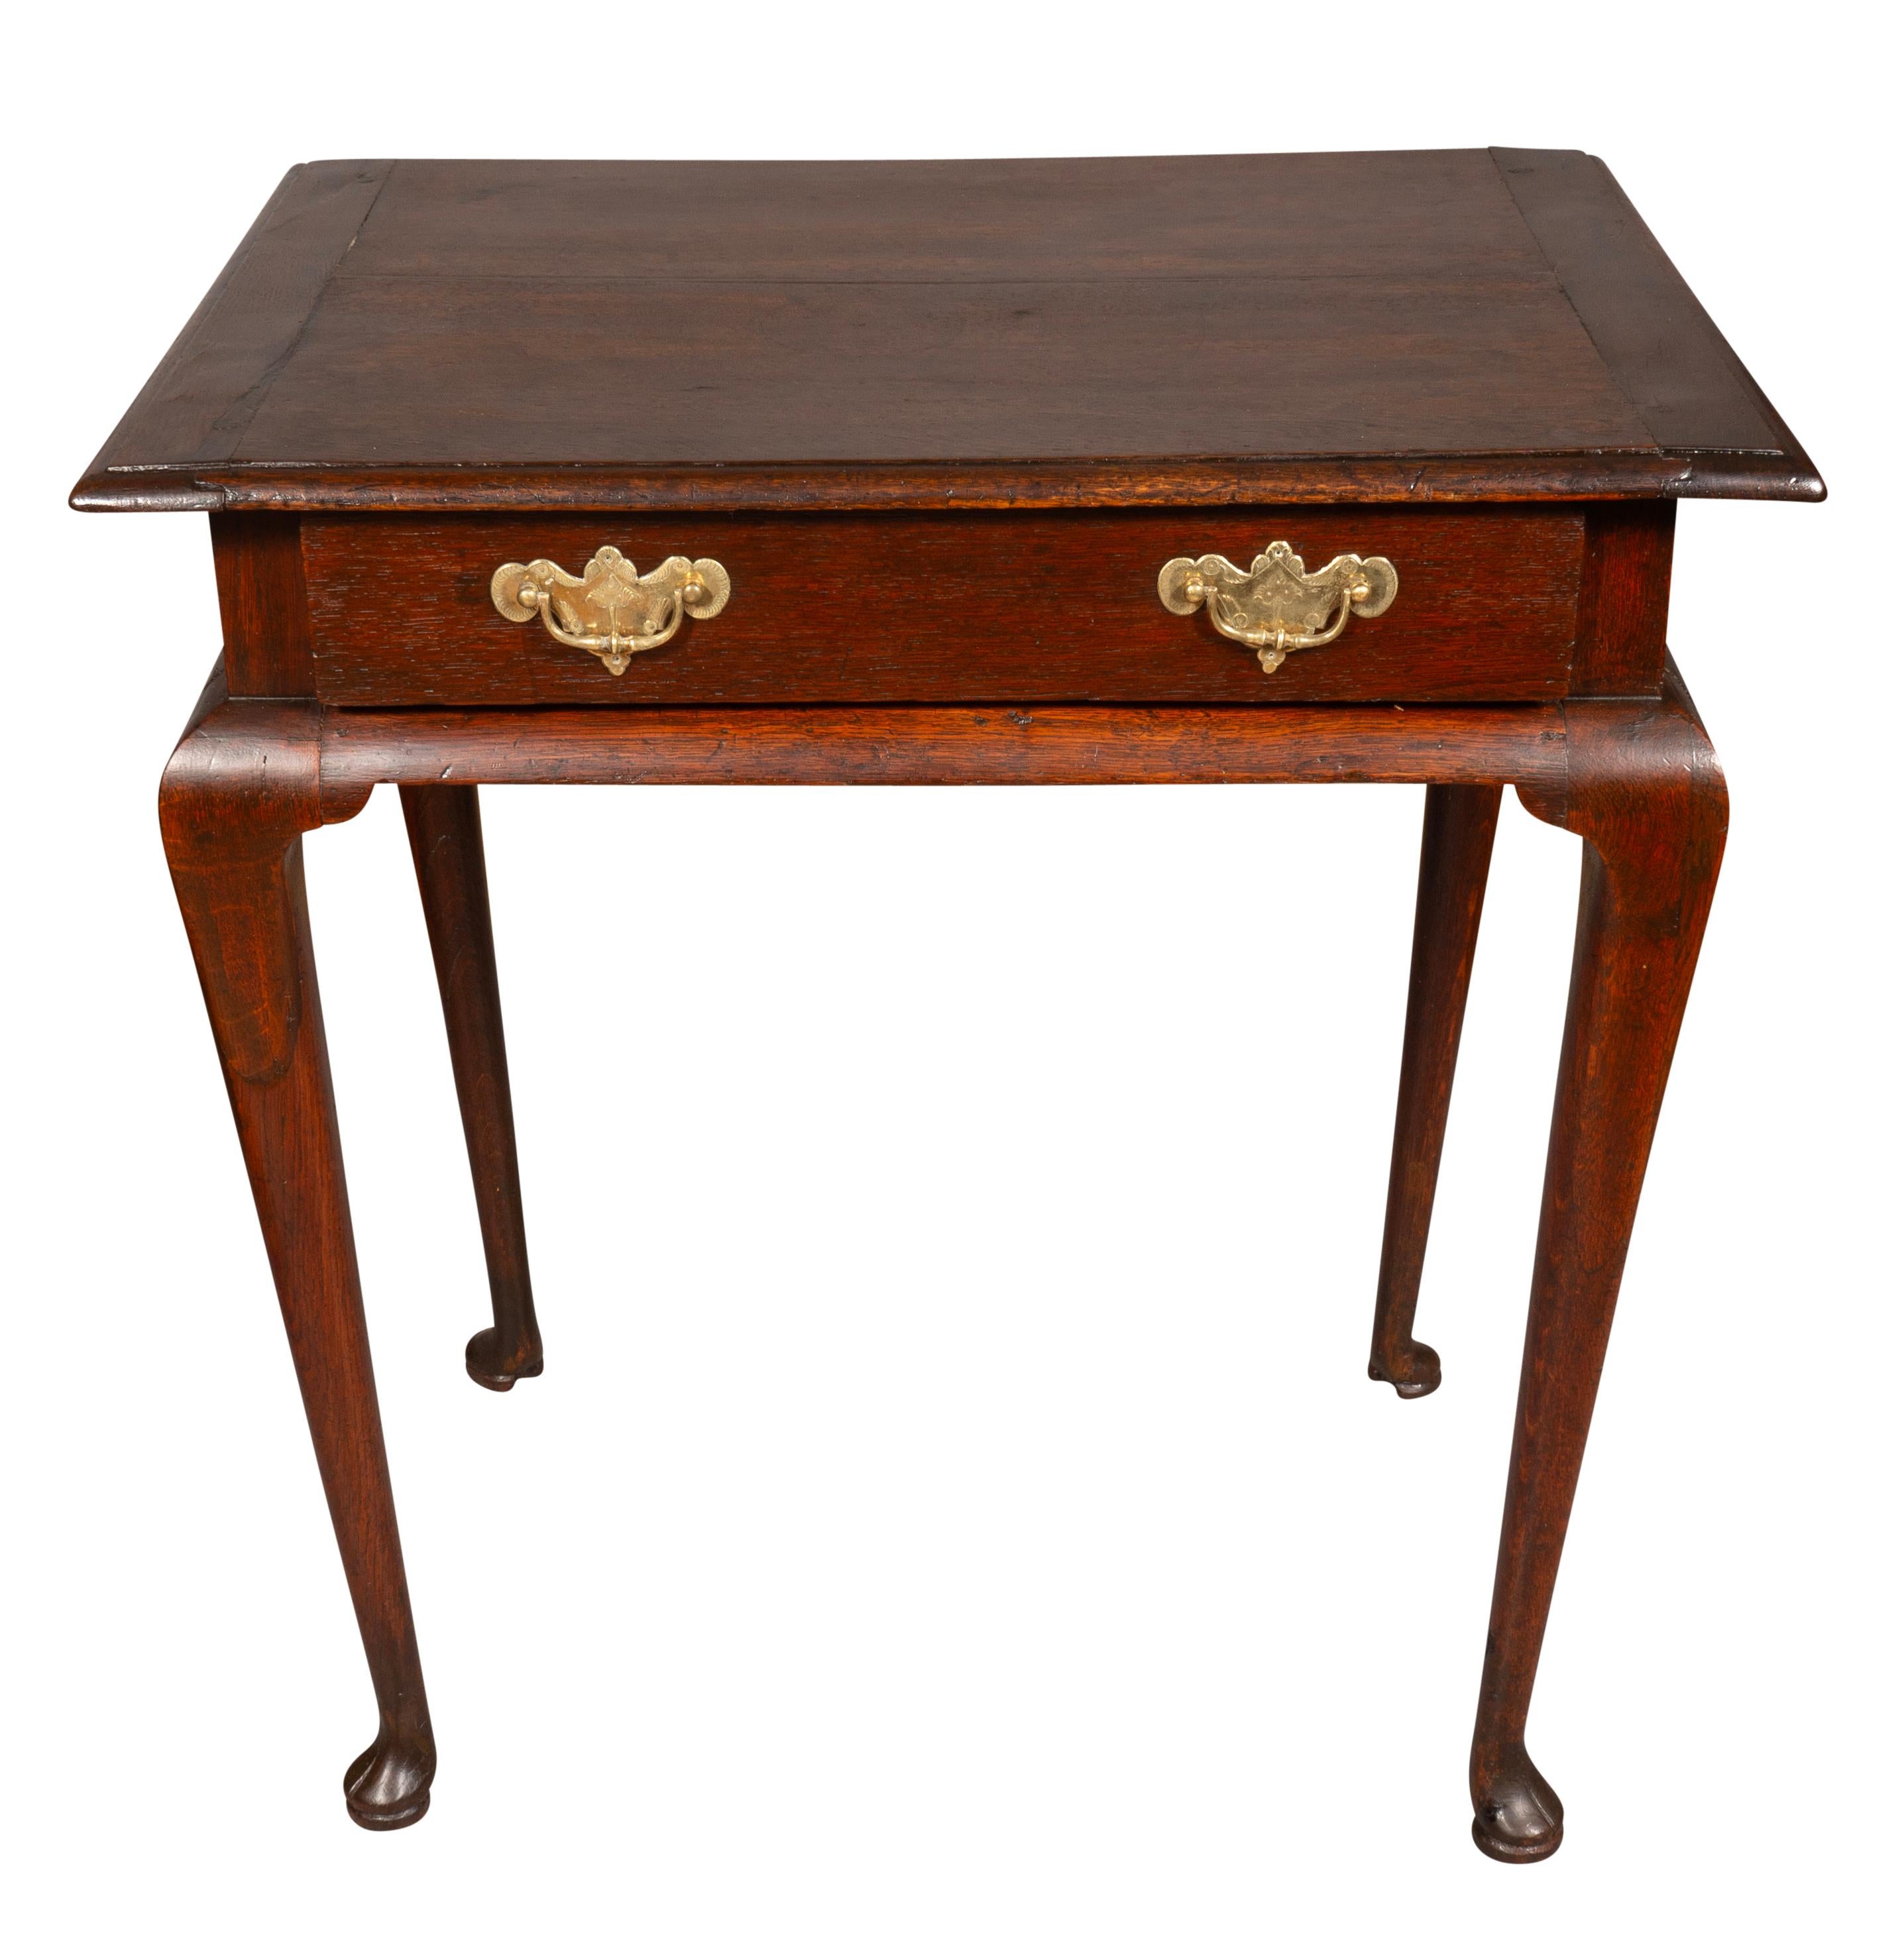 With a rectangular top over a drawer with a pair of brass handles. Raised on cabriole legs ending on pad feet.